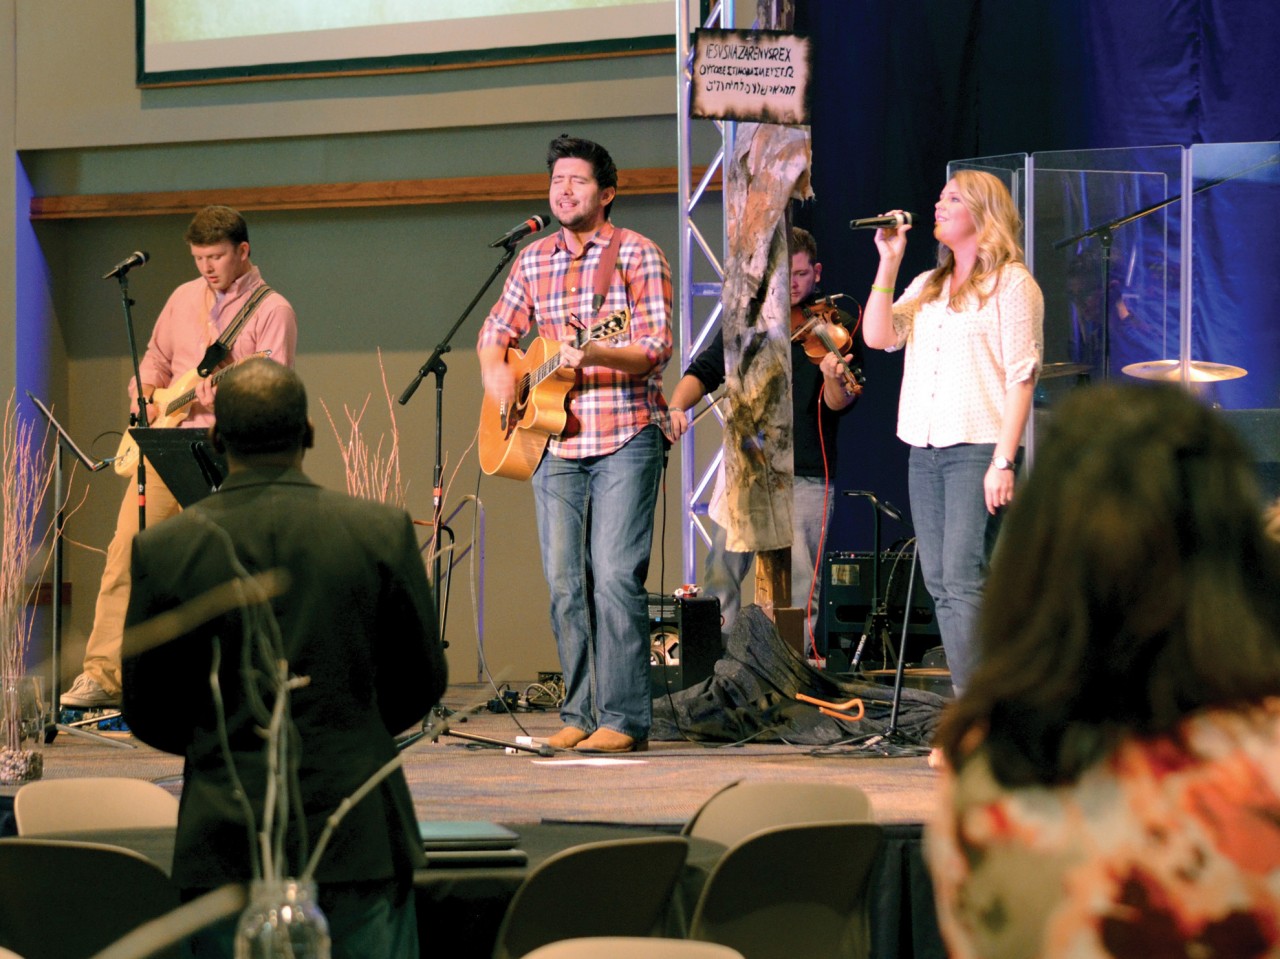 Worship was led by Randy and Lauren Faram and their band.